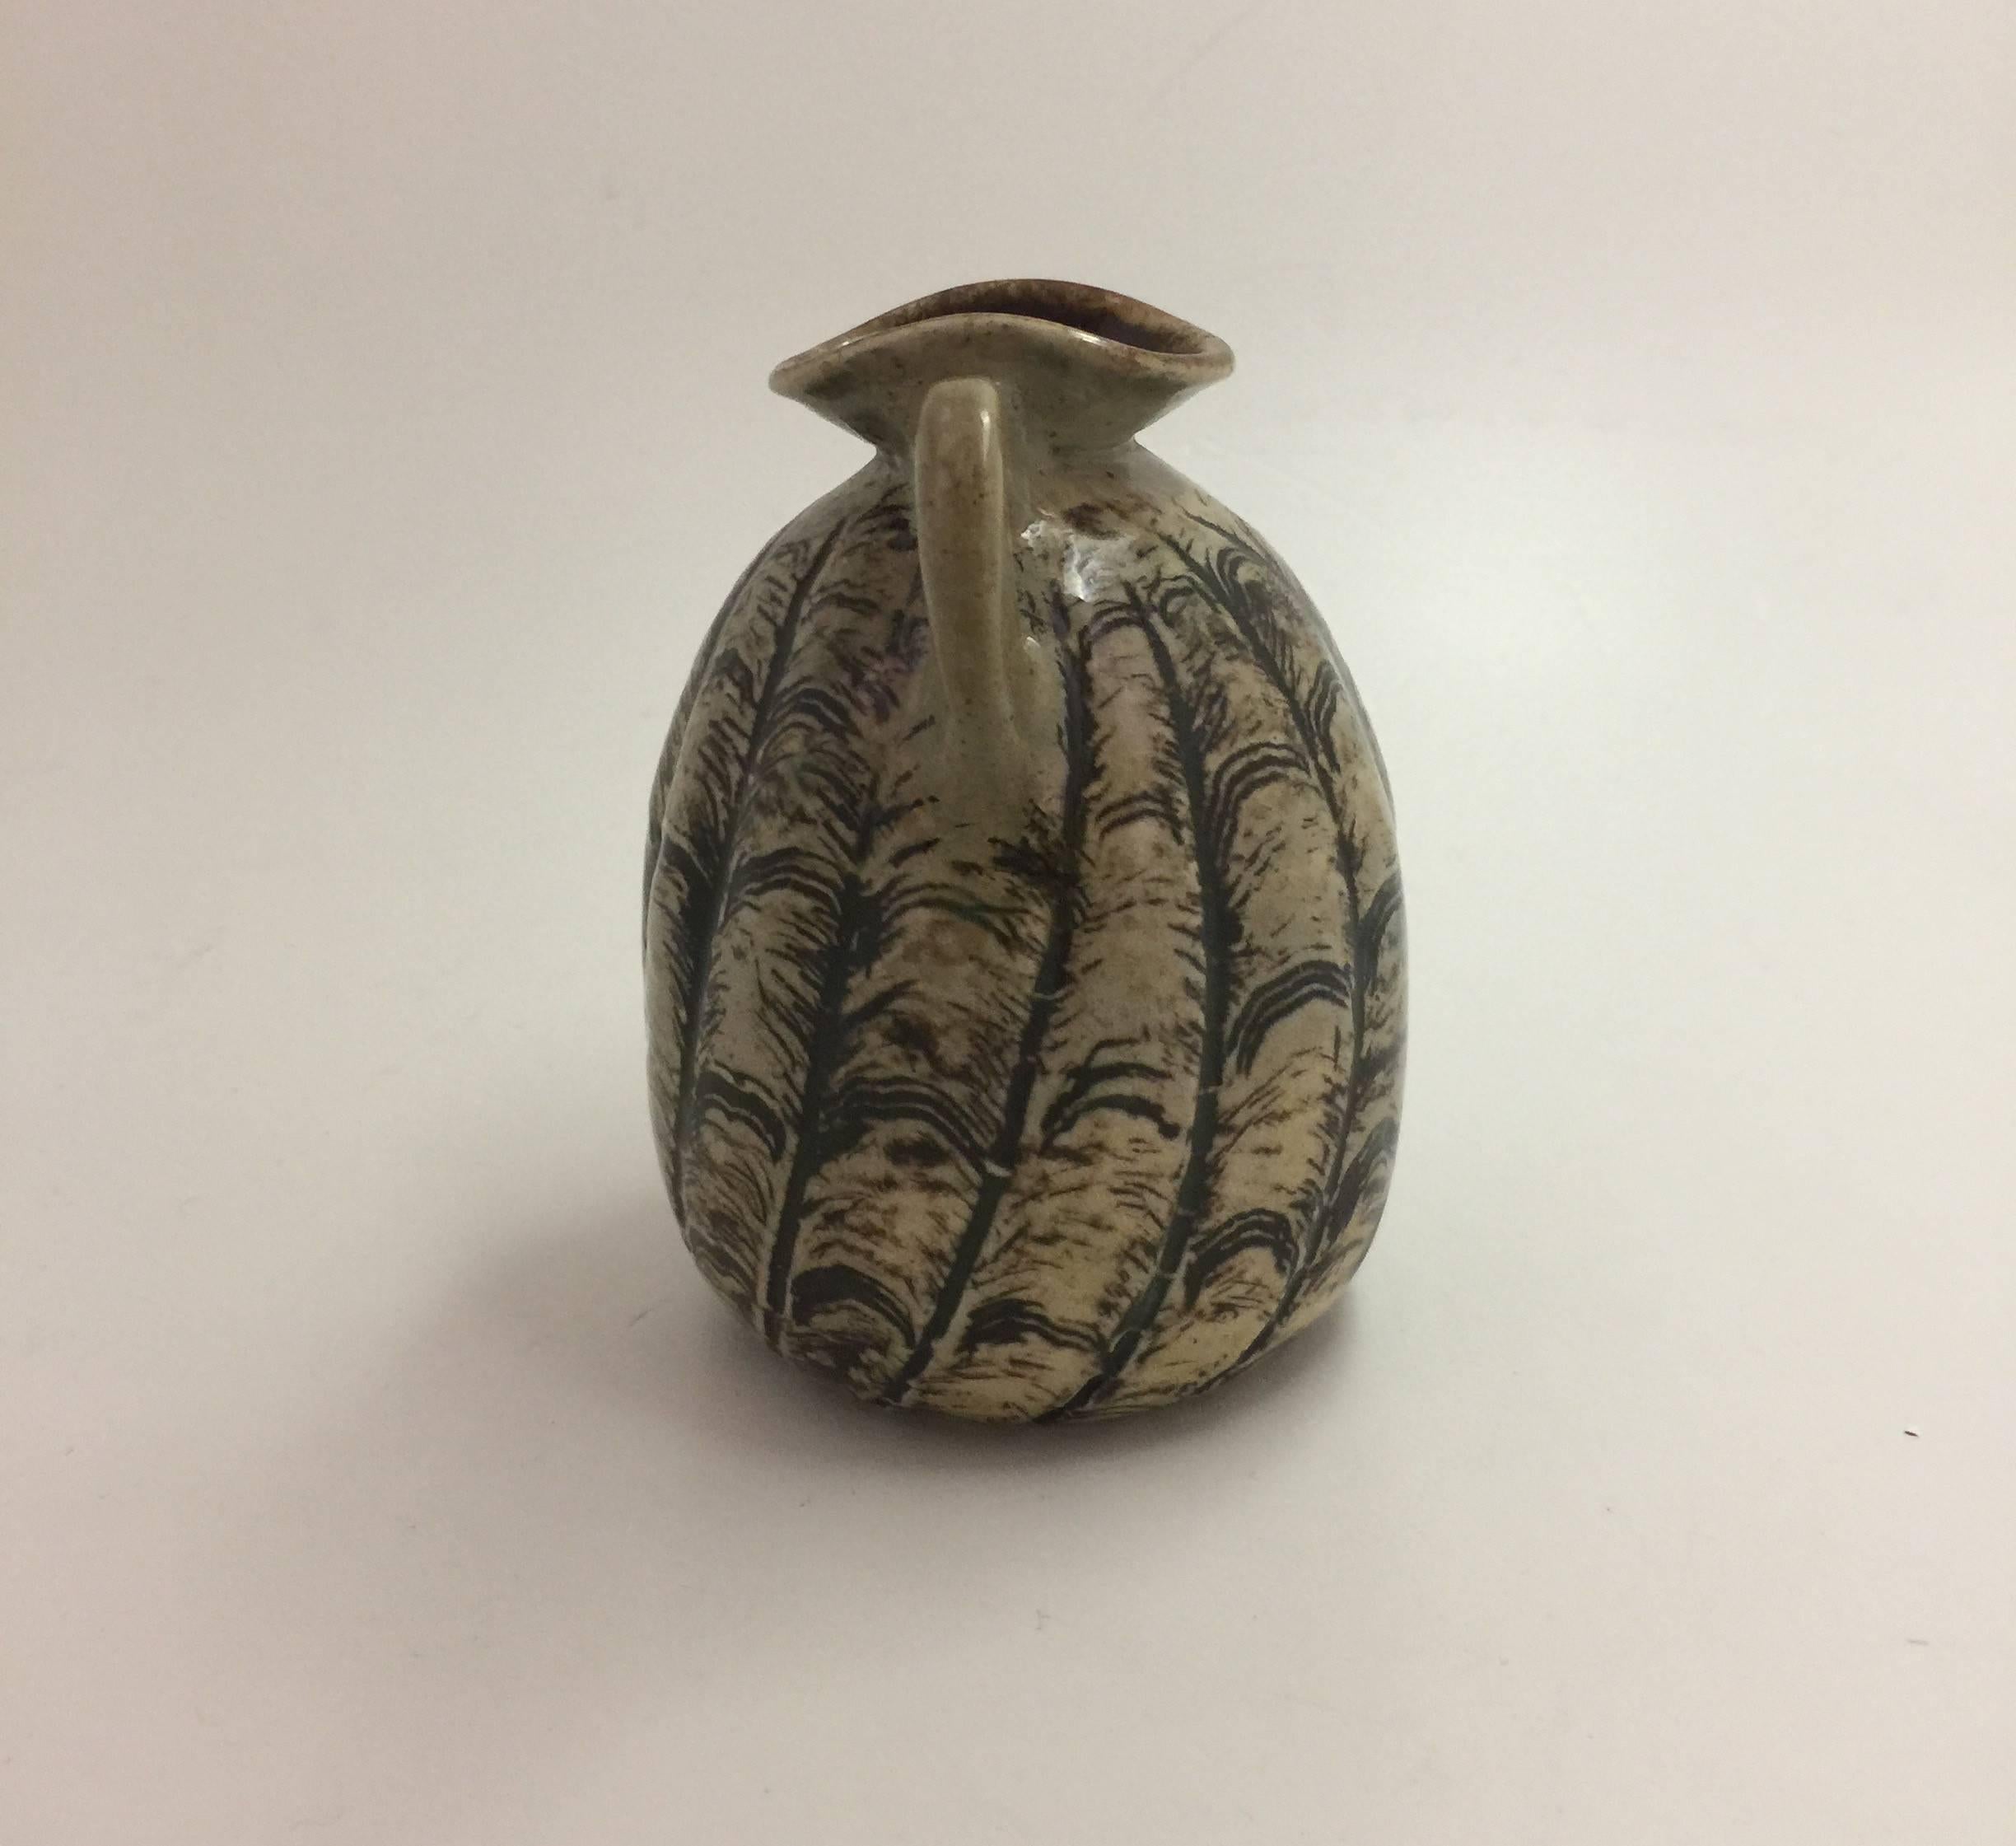 Aesthetic Movement Martin Brothers Miniature Two Handled Vase, circa 1900